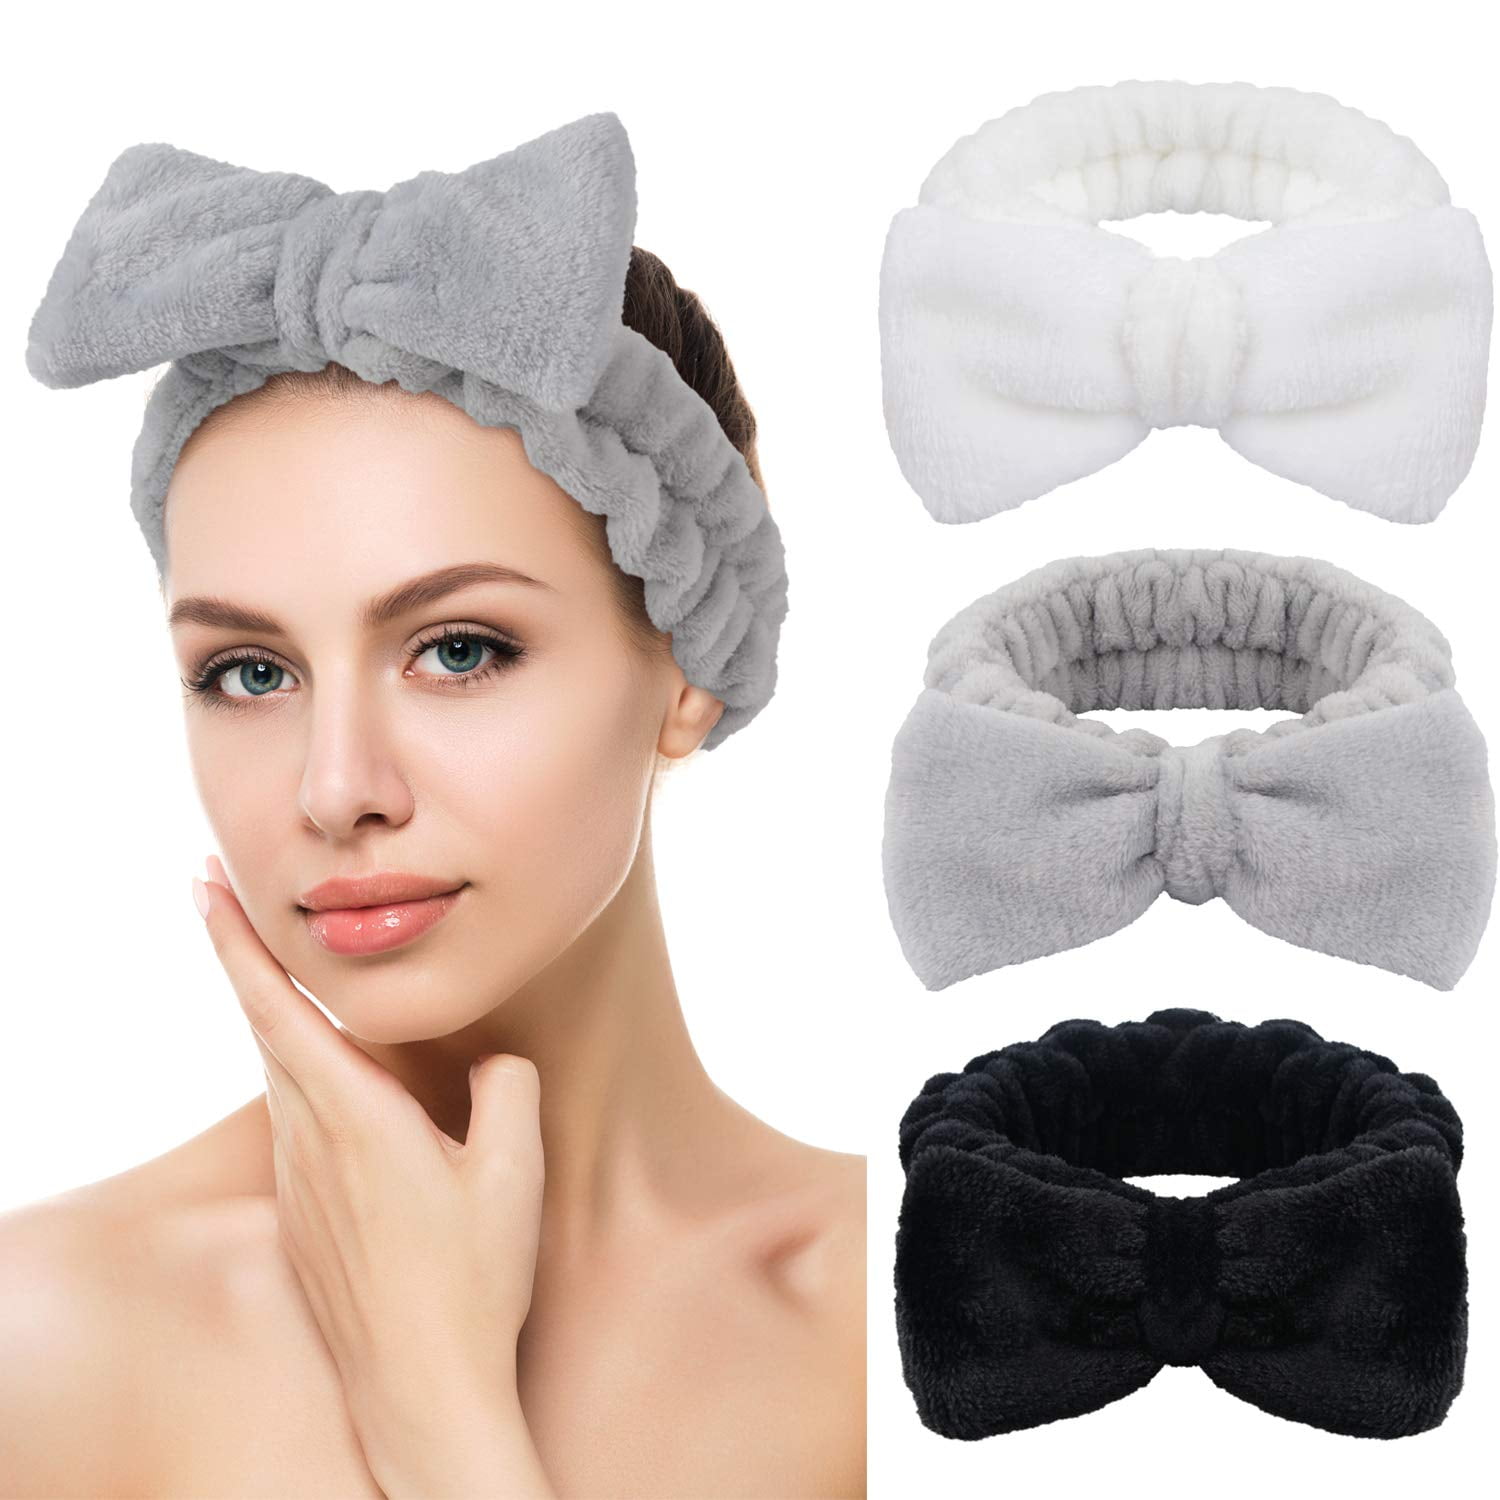 Chuangdi 3 Face Wash Bands for Makeup and Yoga Sports Shower Face Spa  Headband Elastic Headband for Girls and Women (Black, White, Light Grey)